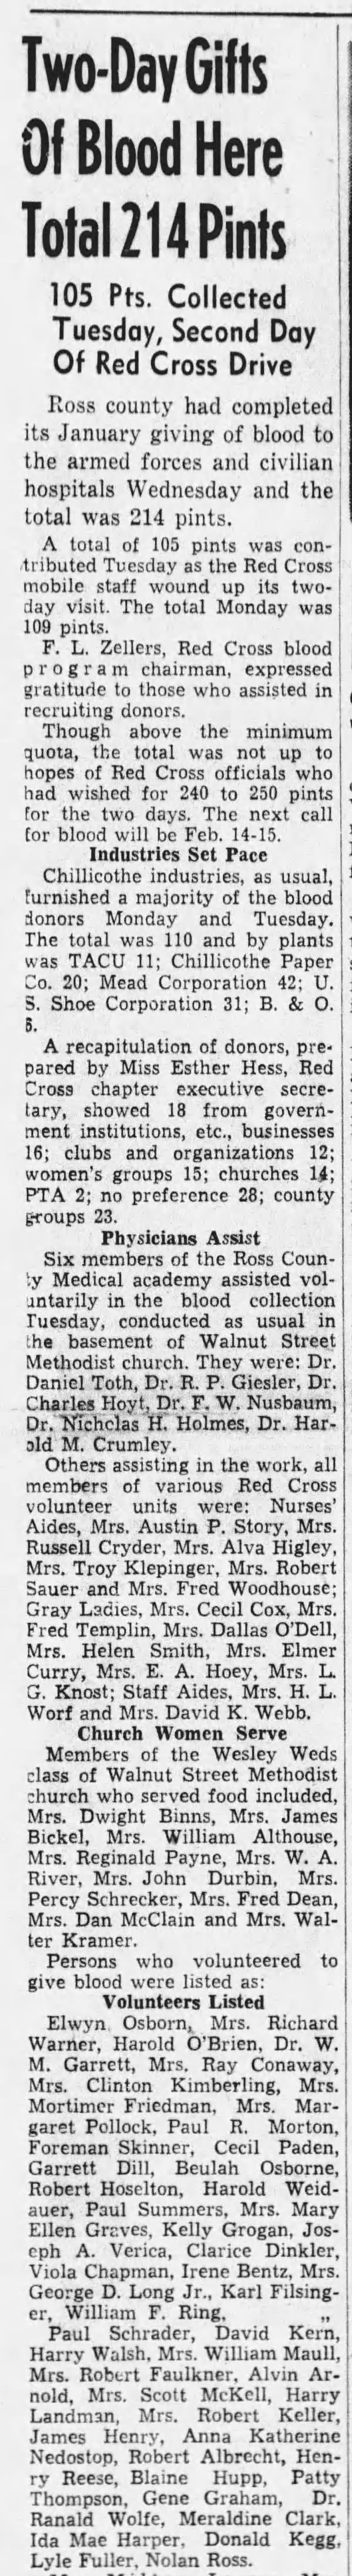 1951 Dr. Ranald Wolfe was a volunteer for a blood drive.